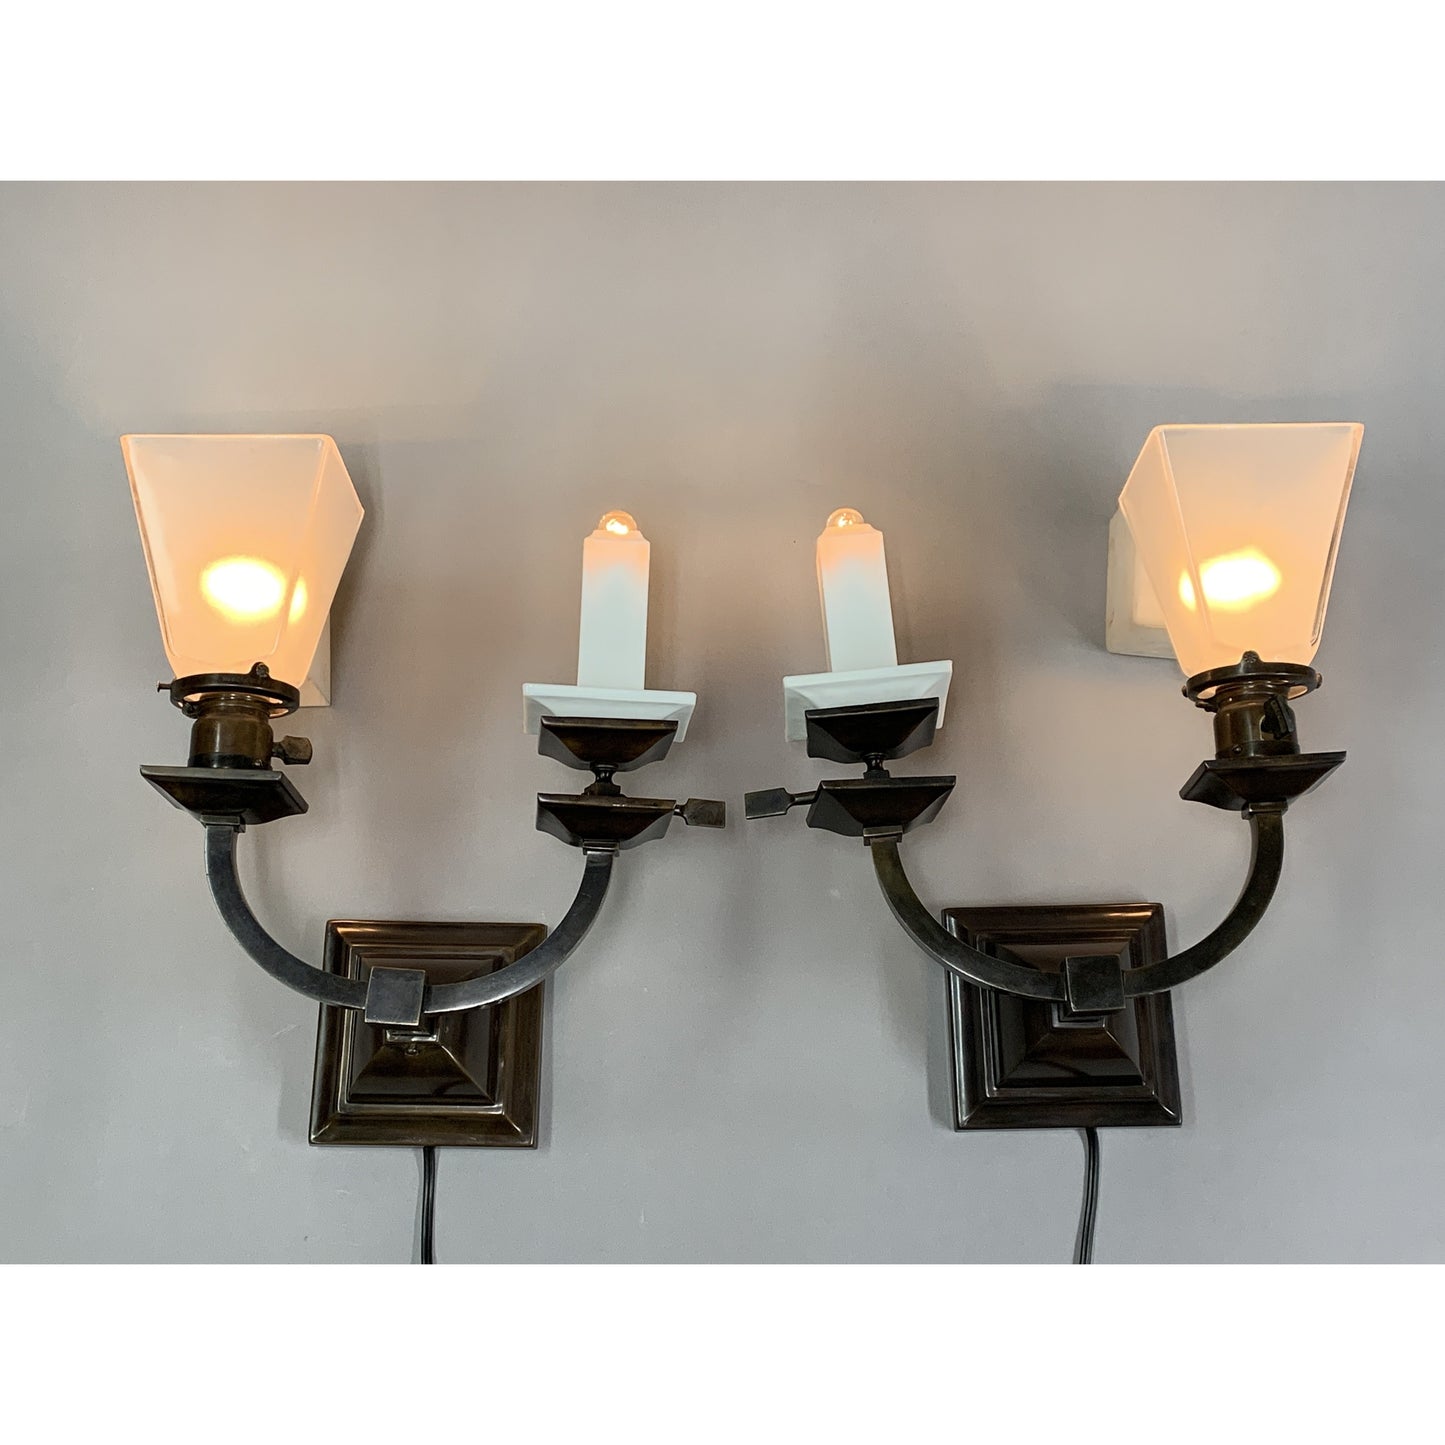 Antique Gas and Electric Arts and Crafts Sconces, Restored.   #1516 - Filament Vintage Lighting